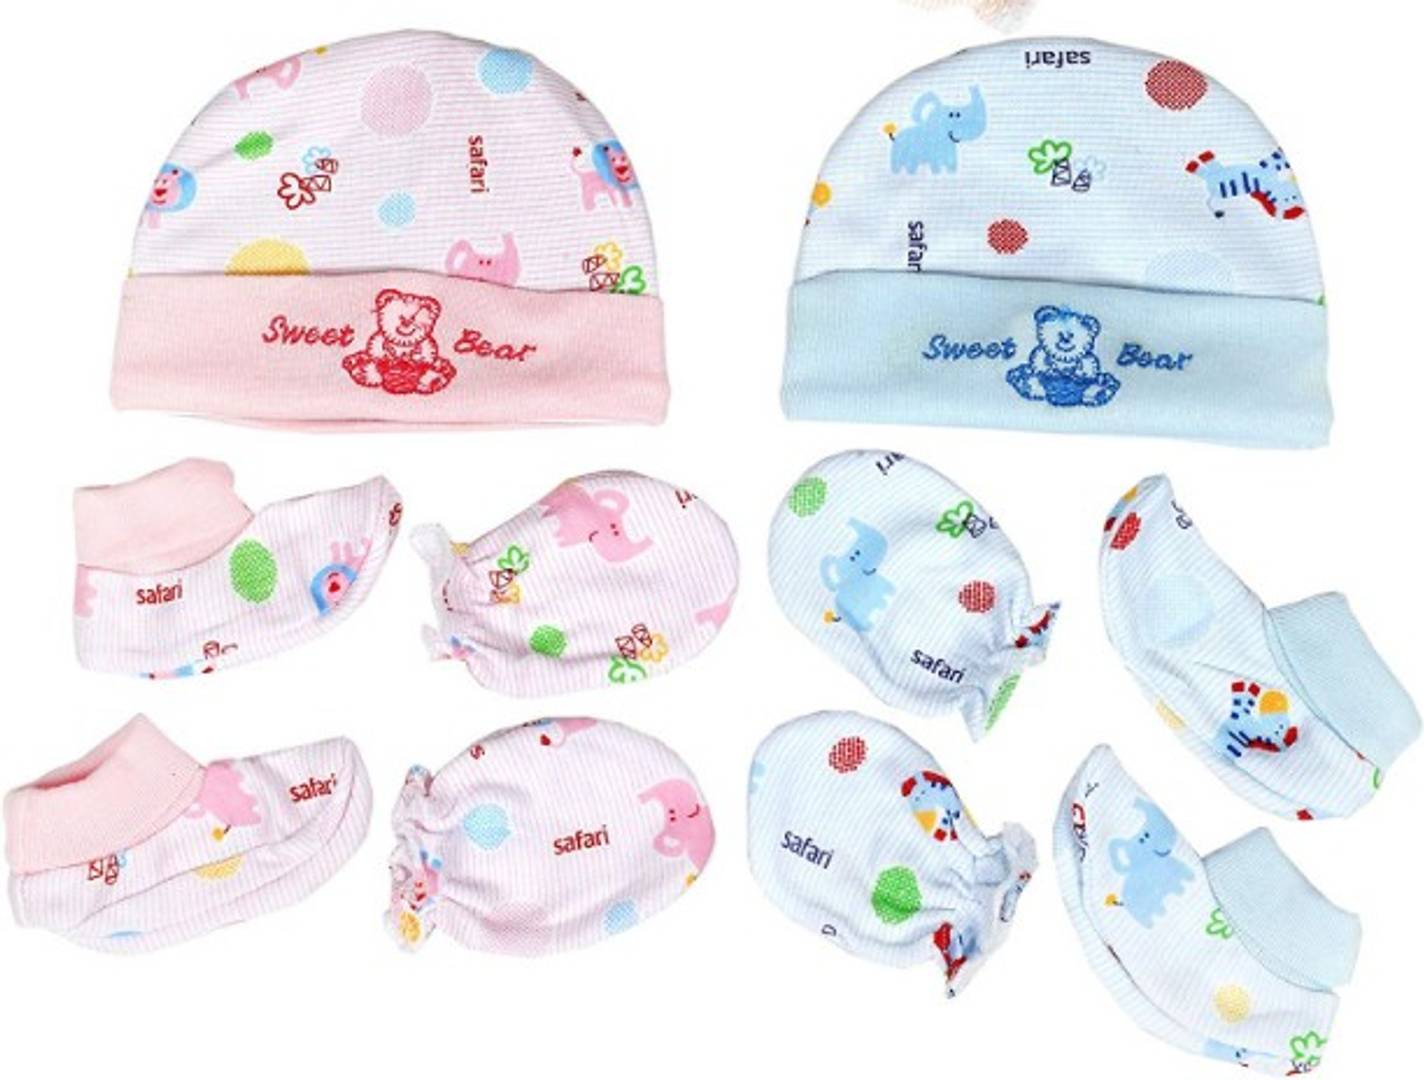 My Newborn Baby Cotton Mitten Sets with Cap and Booty (0-6month) Pack of 2